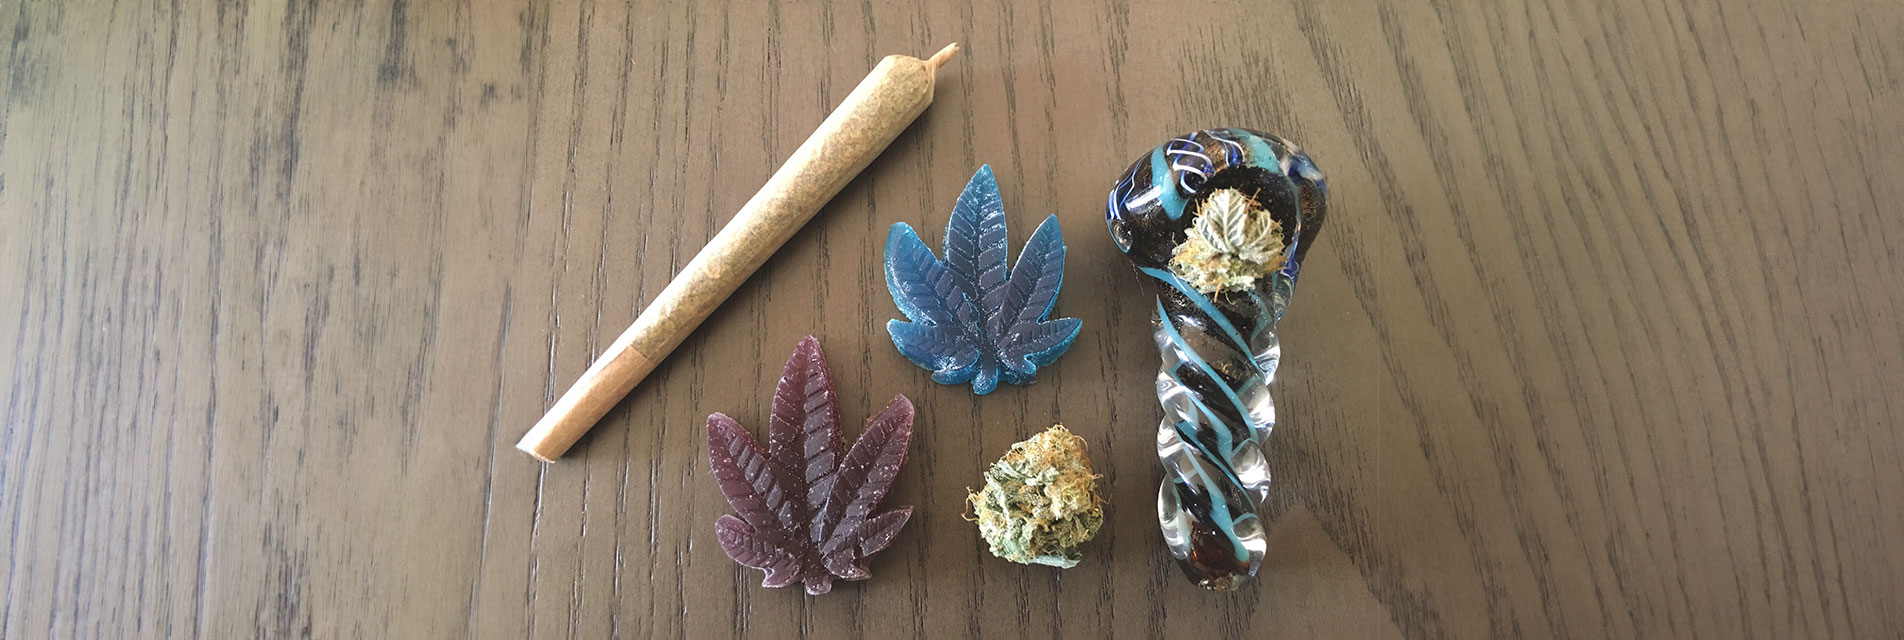 A variety of colorful pipes, a heap of CBD flower, and a step-by-step guide on packing and lighting the pipe on a nature-inspired background.